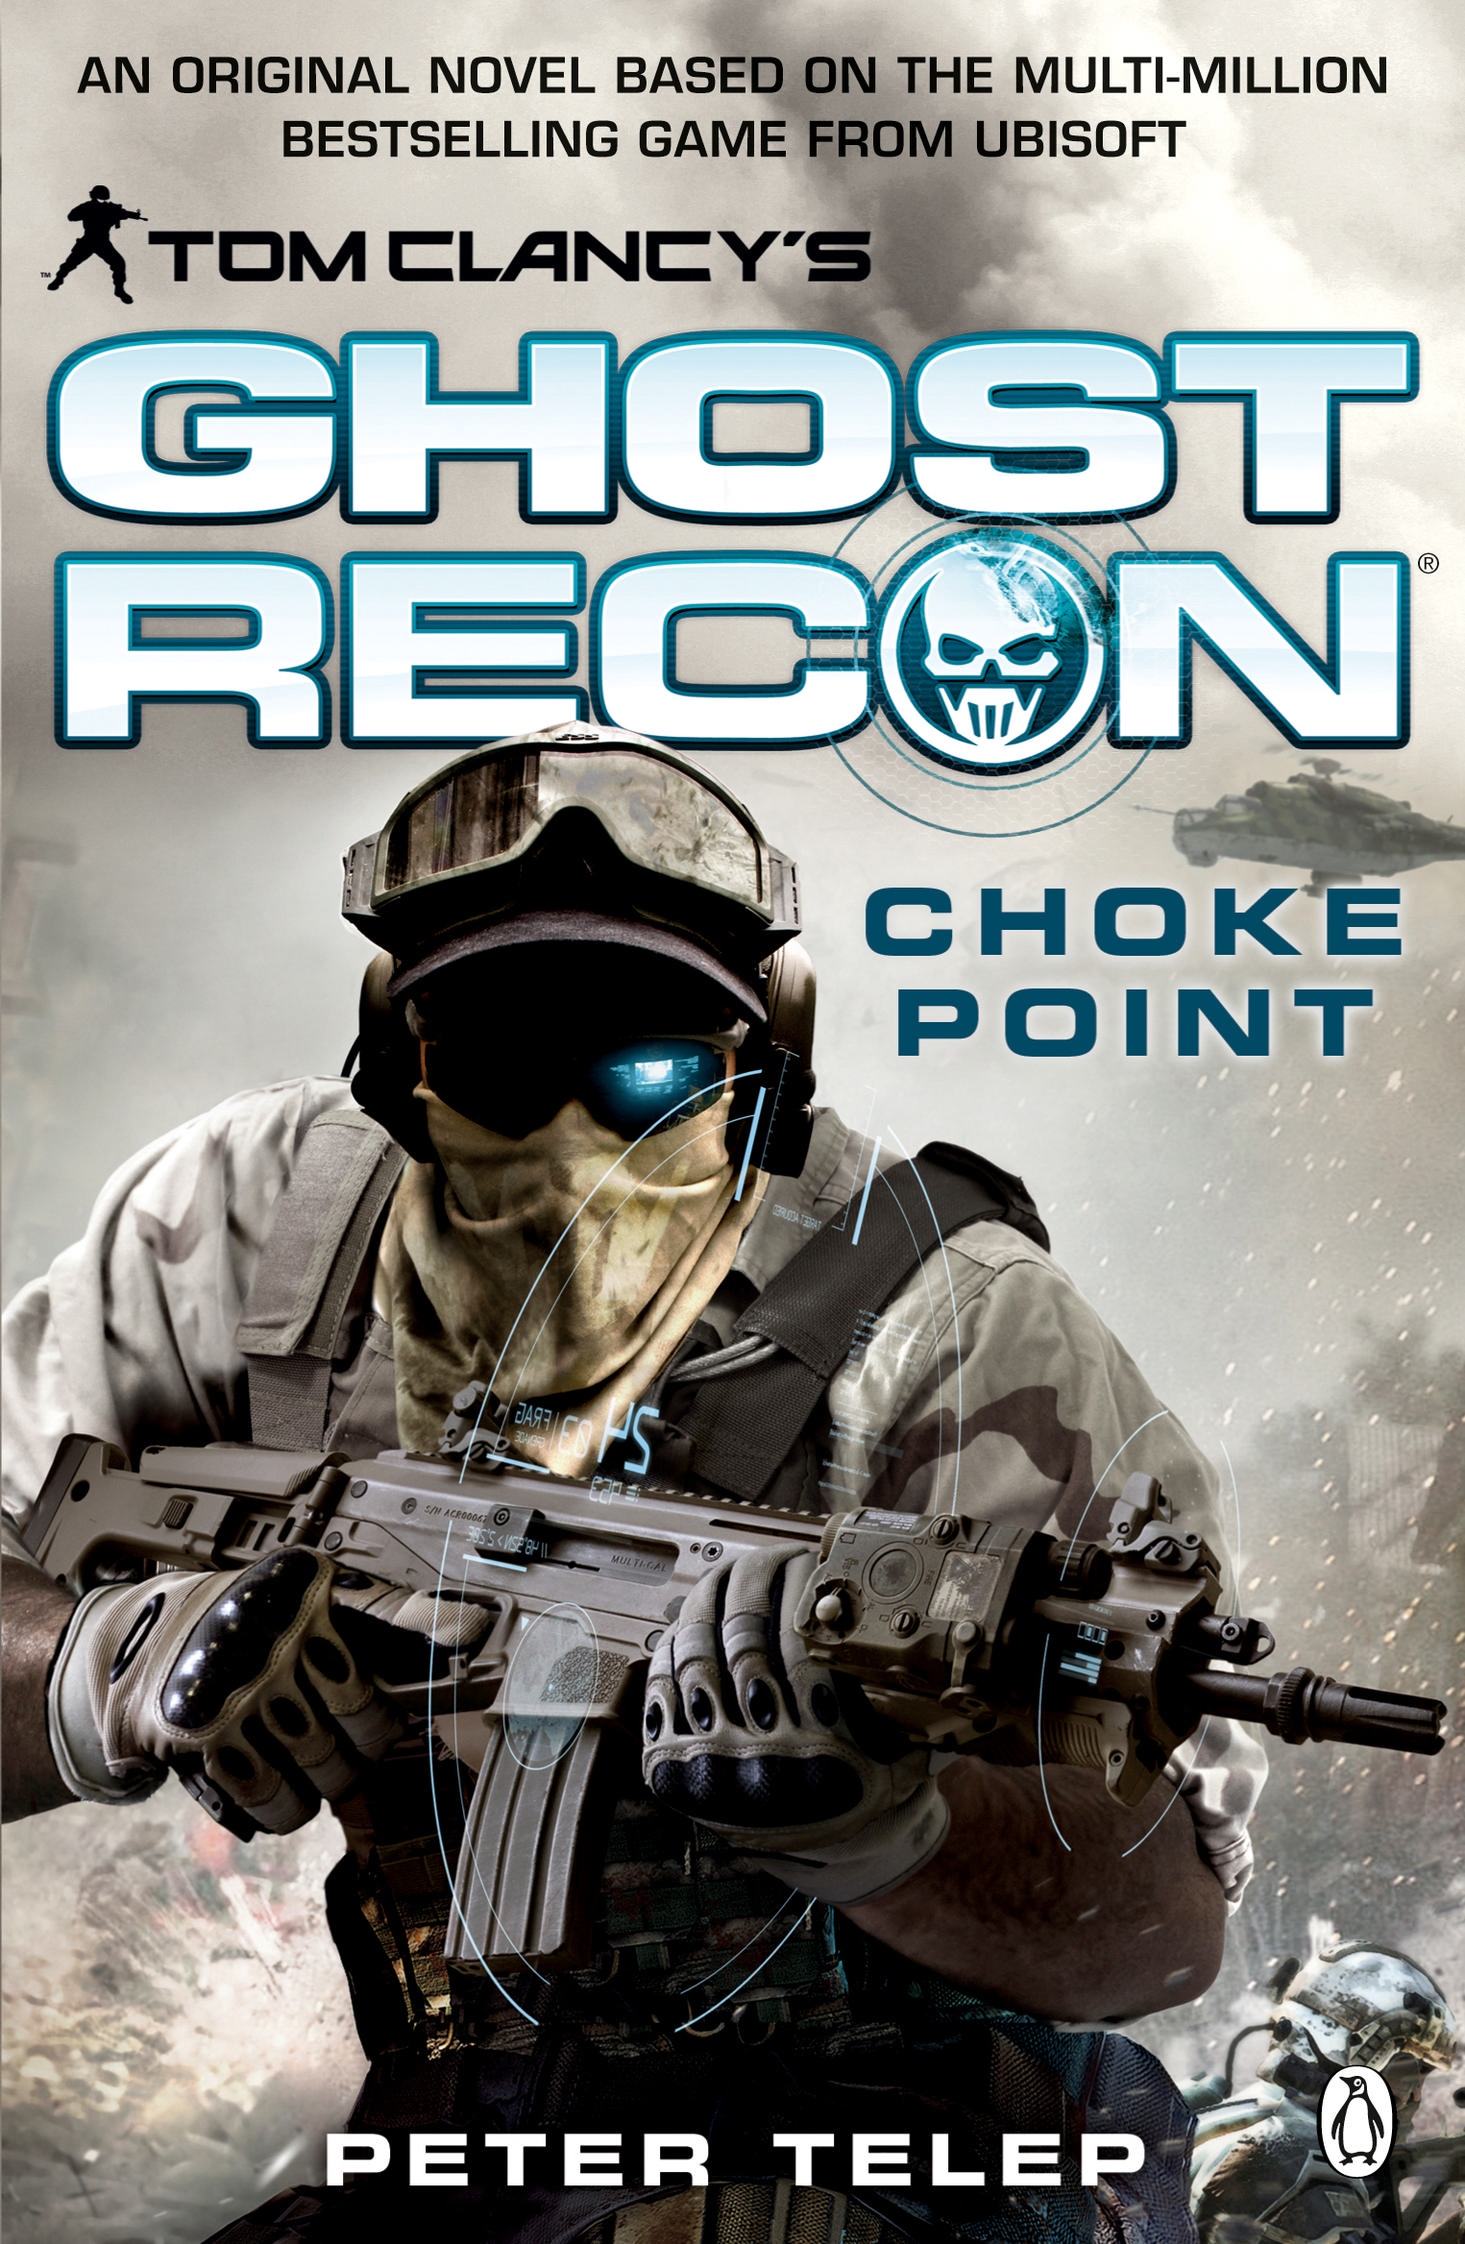 tom clancys ghost recon future soldier